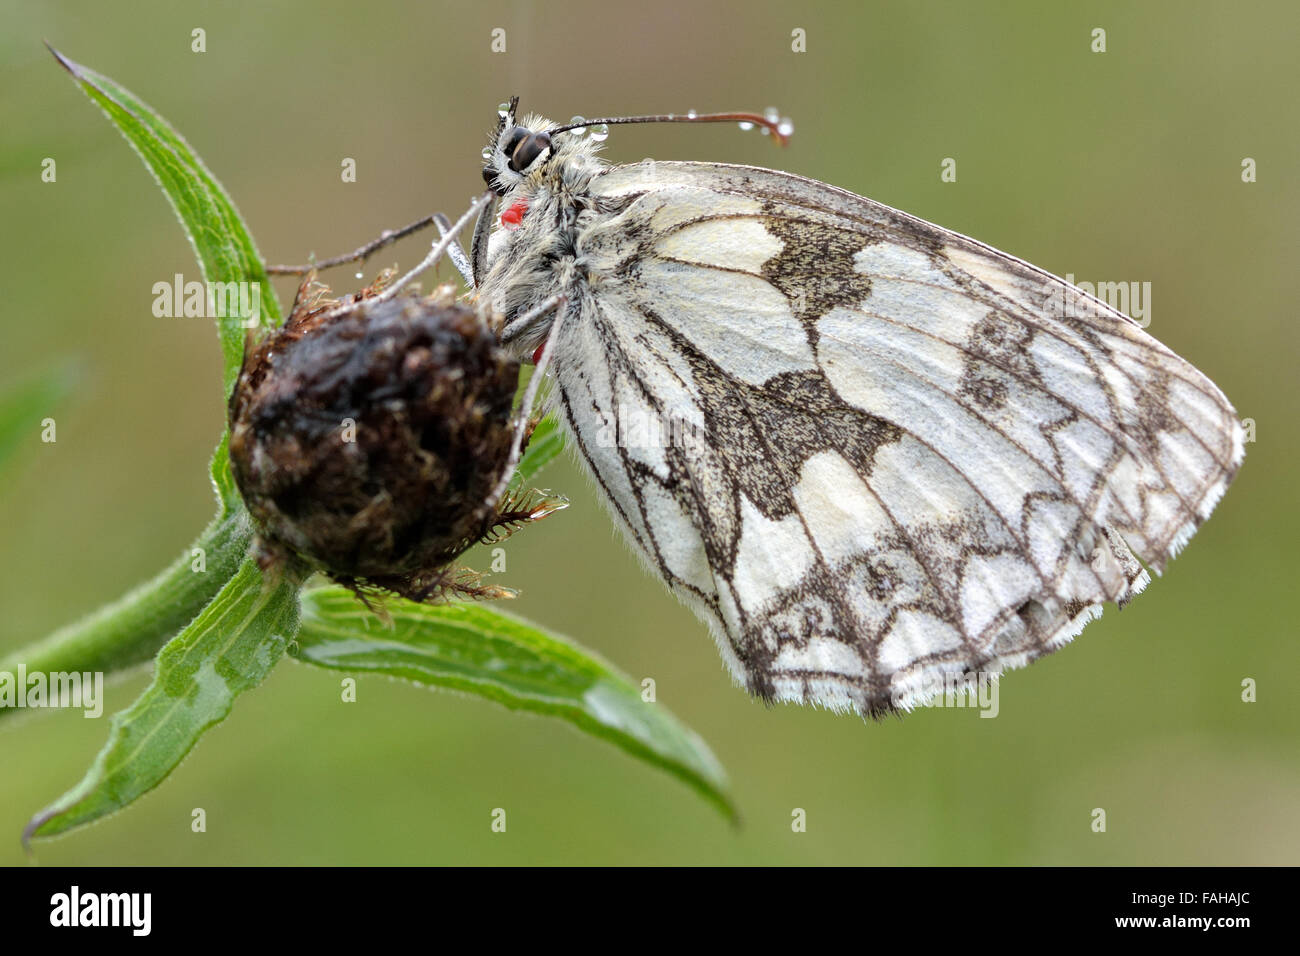 Marbled white butterfly in the rain (Melanargia galathea) with underside visible with red parasitic mite. Stock Photo